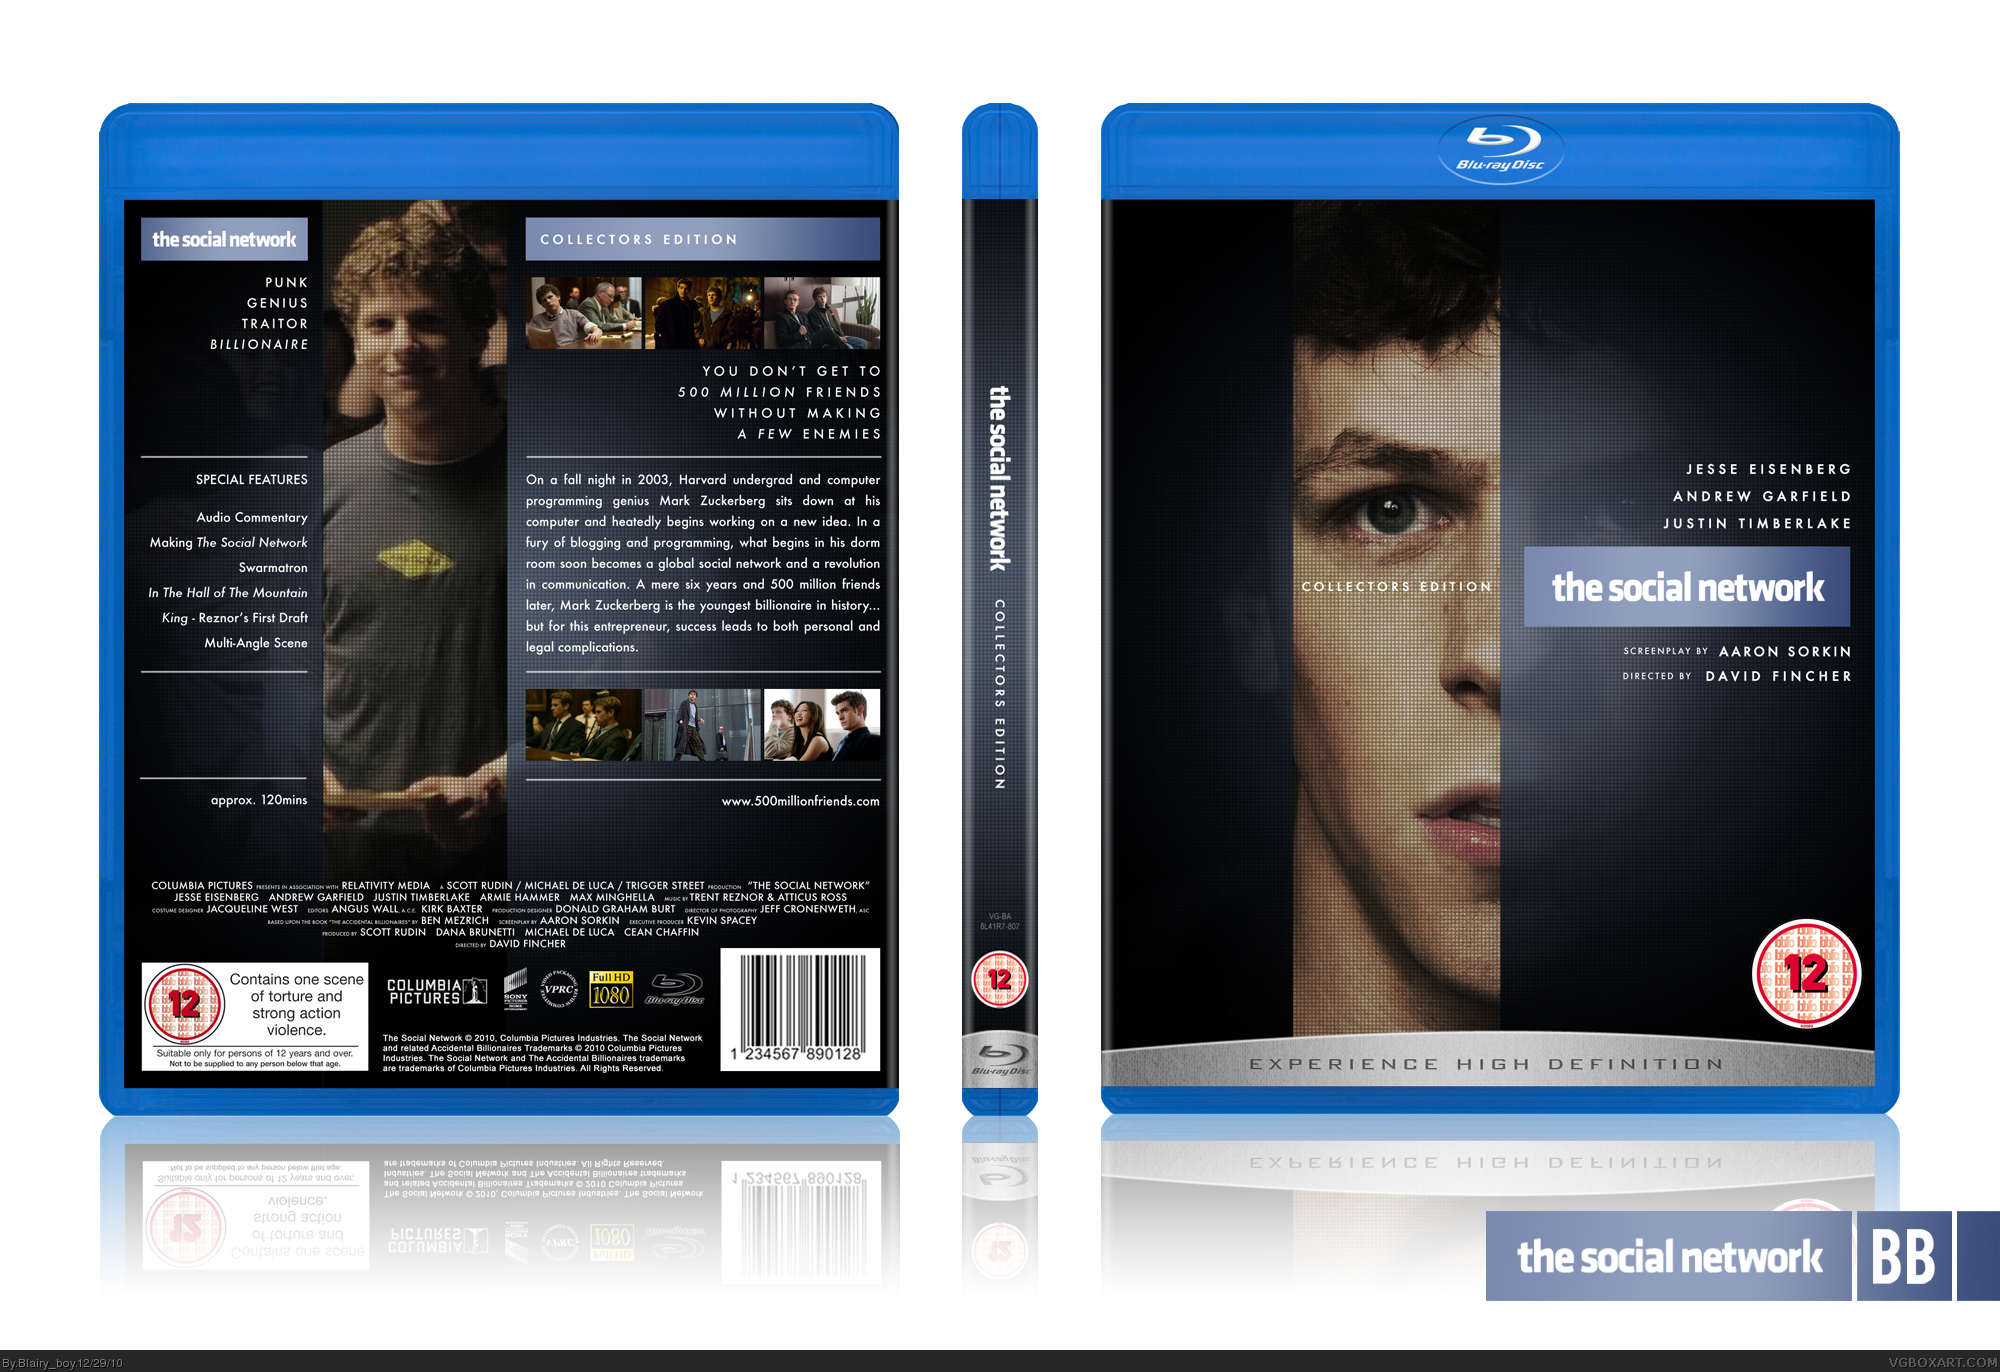 The Social Network box cover